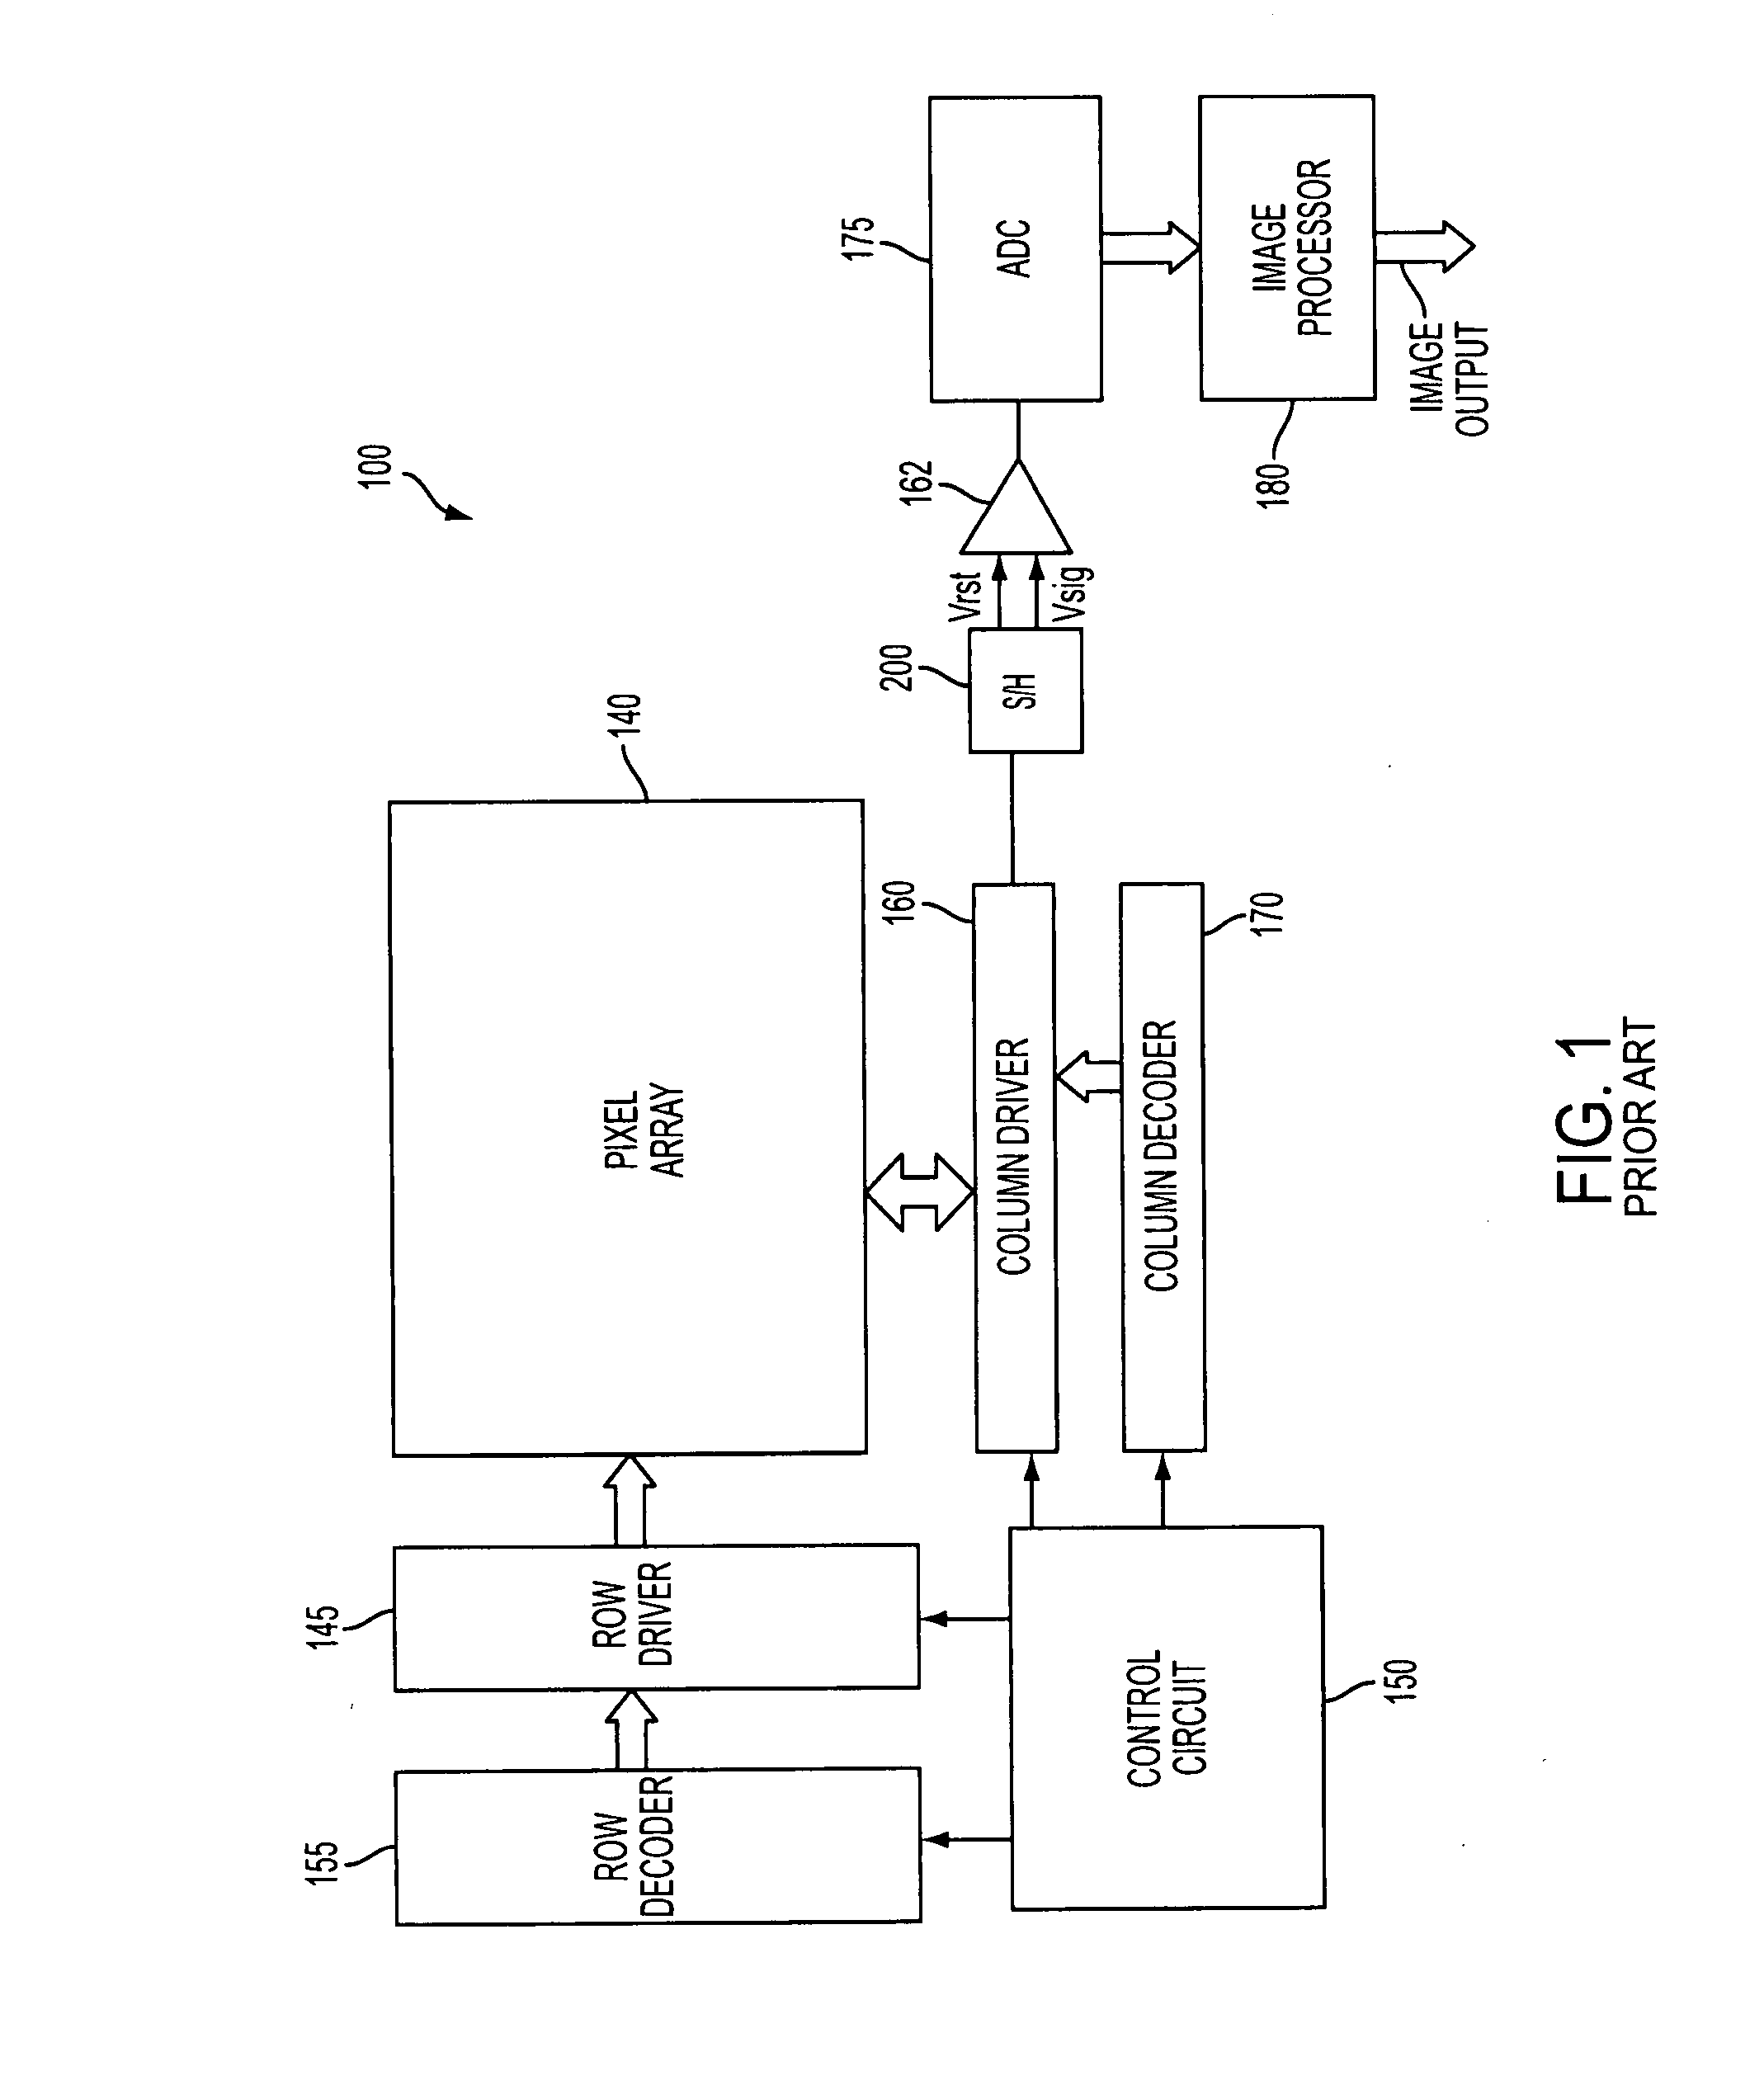 Methods and apparatuses for stacked capacitors for image sensors